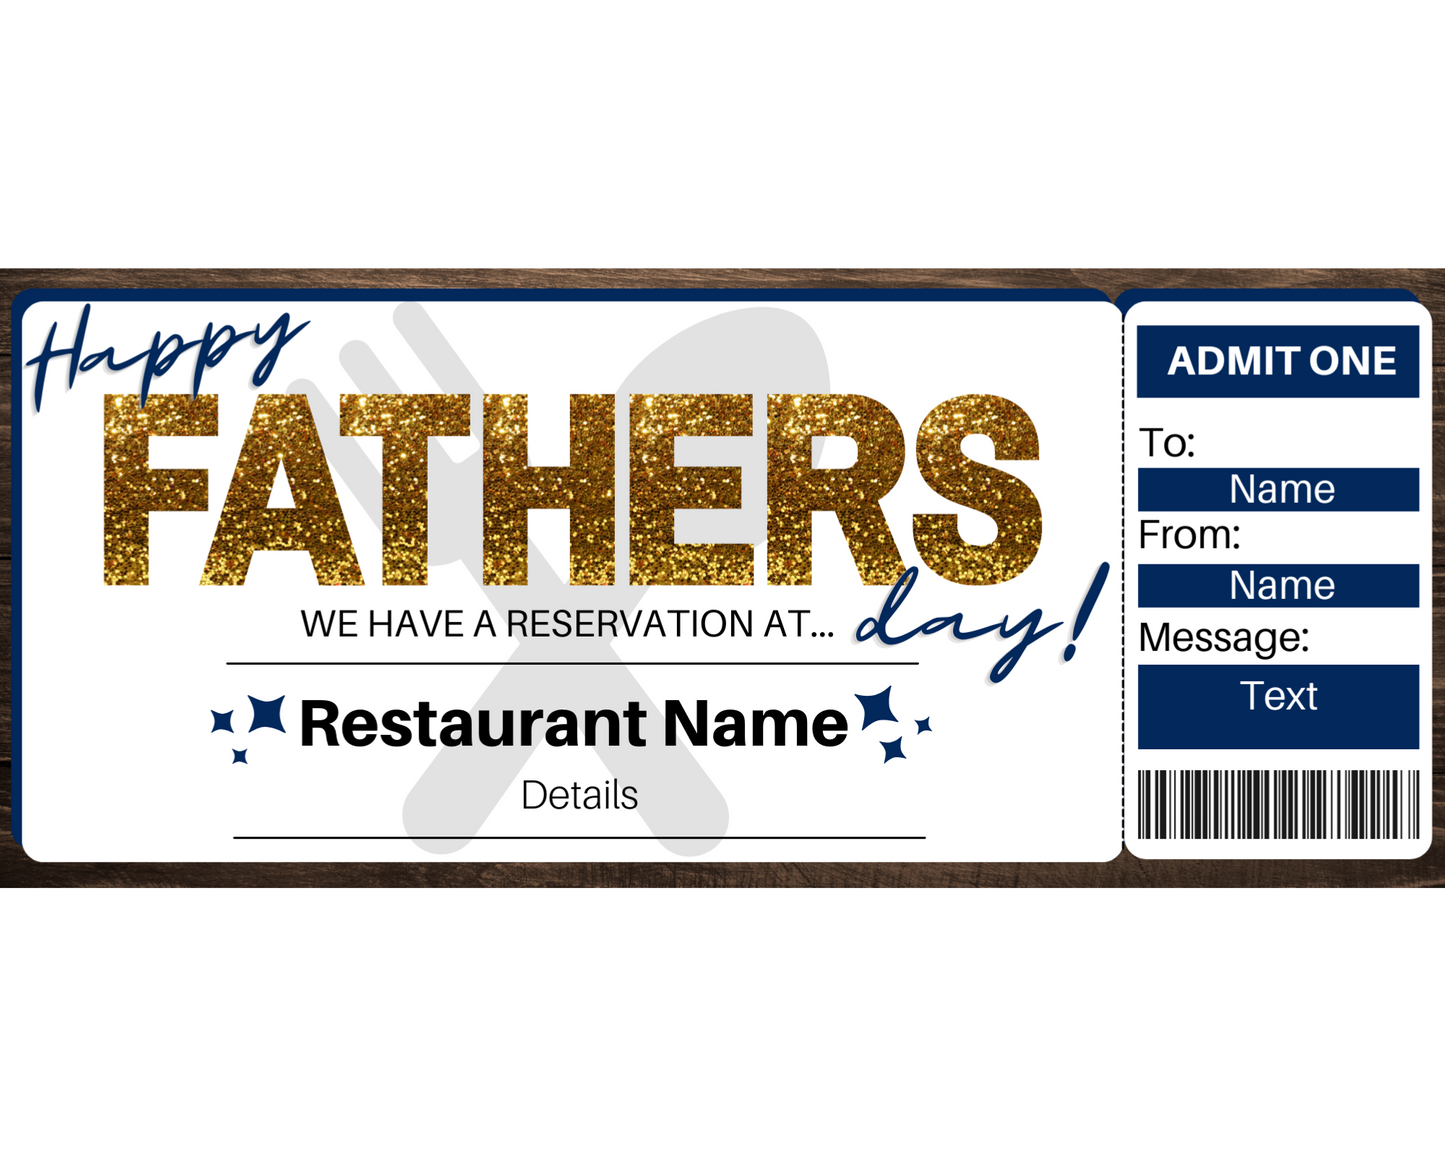 Father's Day Table Reservation Gift Ticket